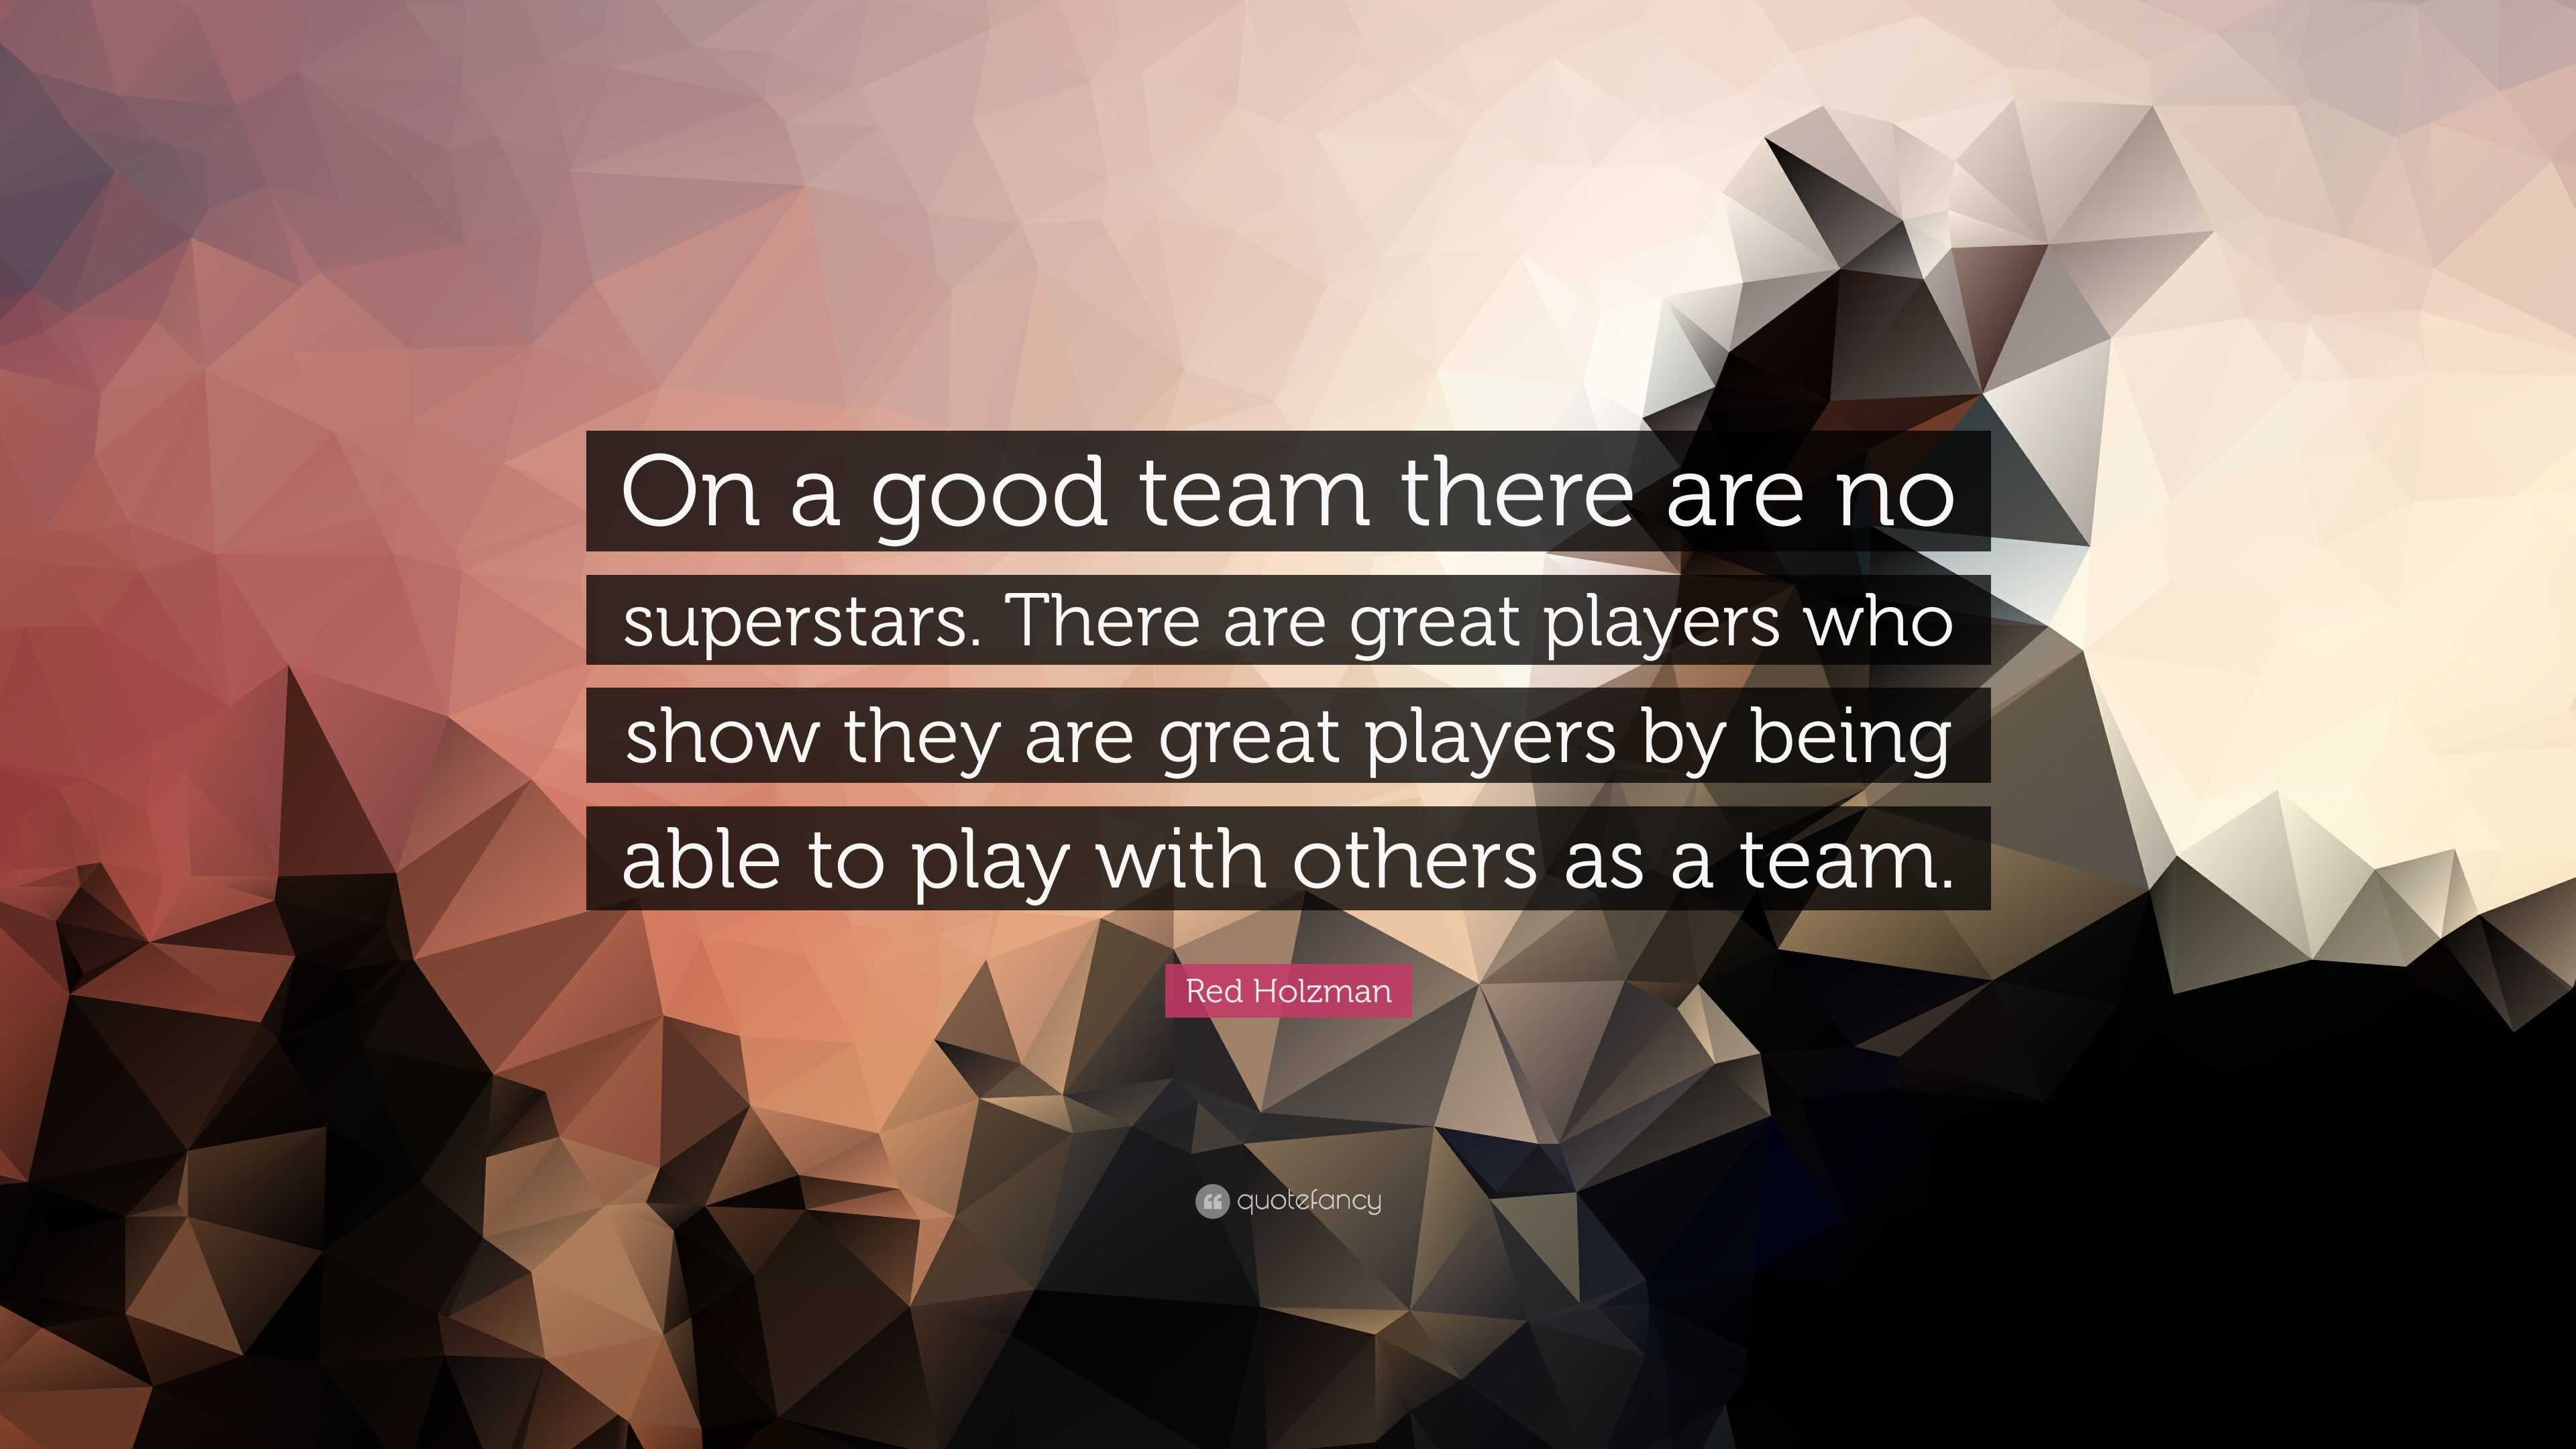 Red Holzman Quote “On a good team there are no superstars. There are